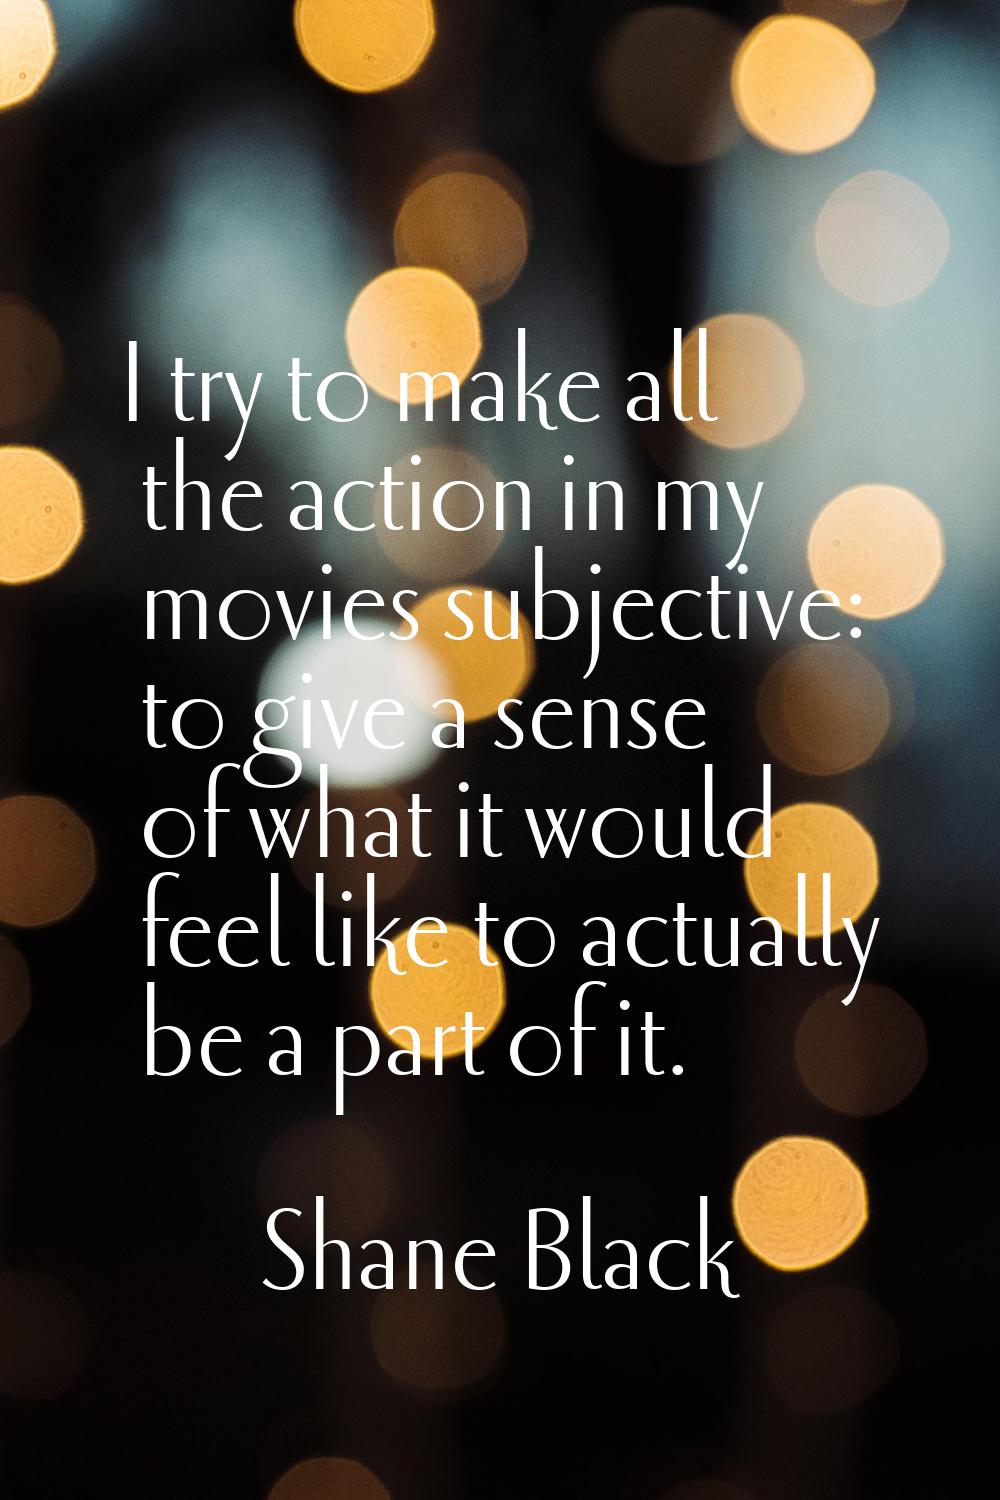 I try to make all the action in my movies subjective: to give a sense of what it would feel like to